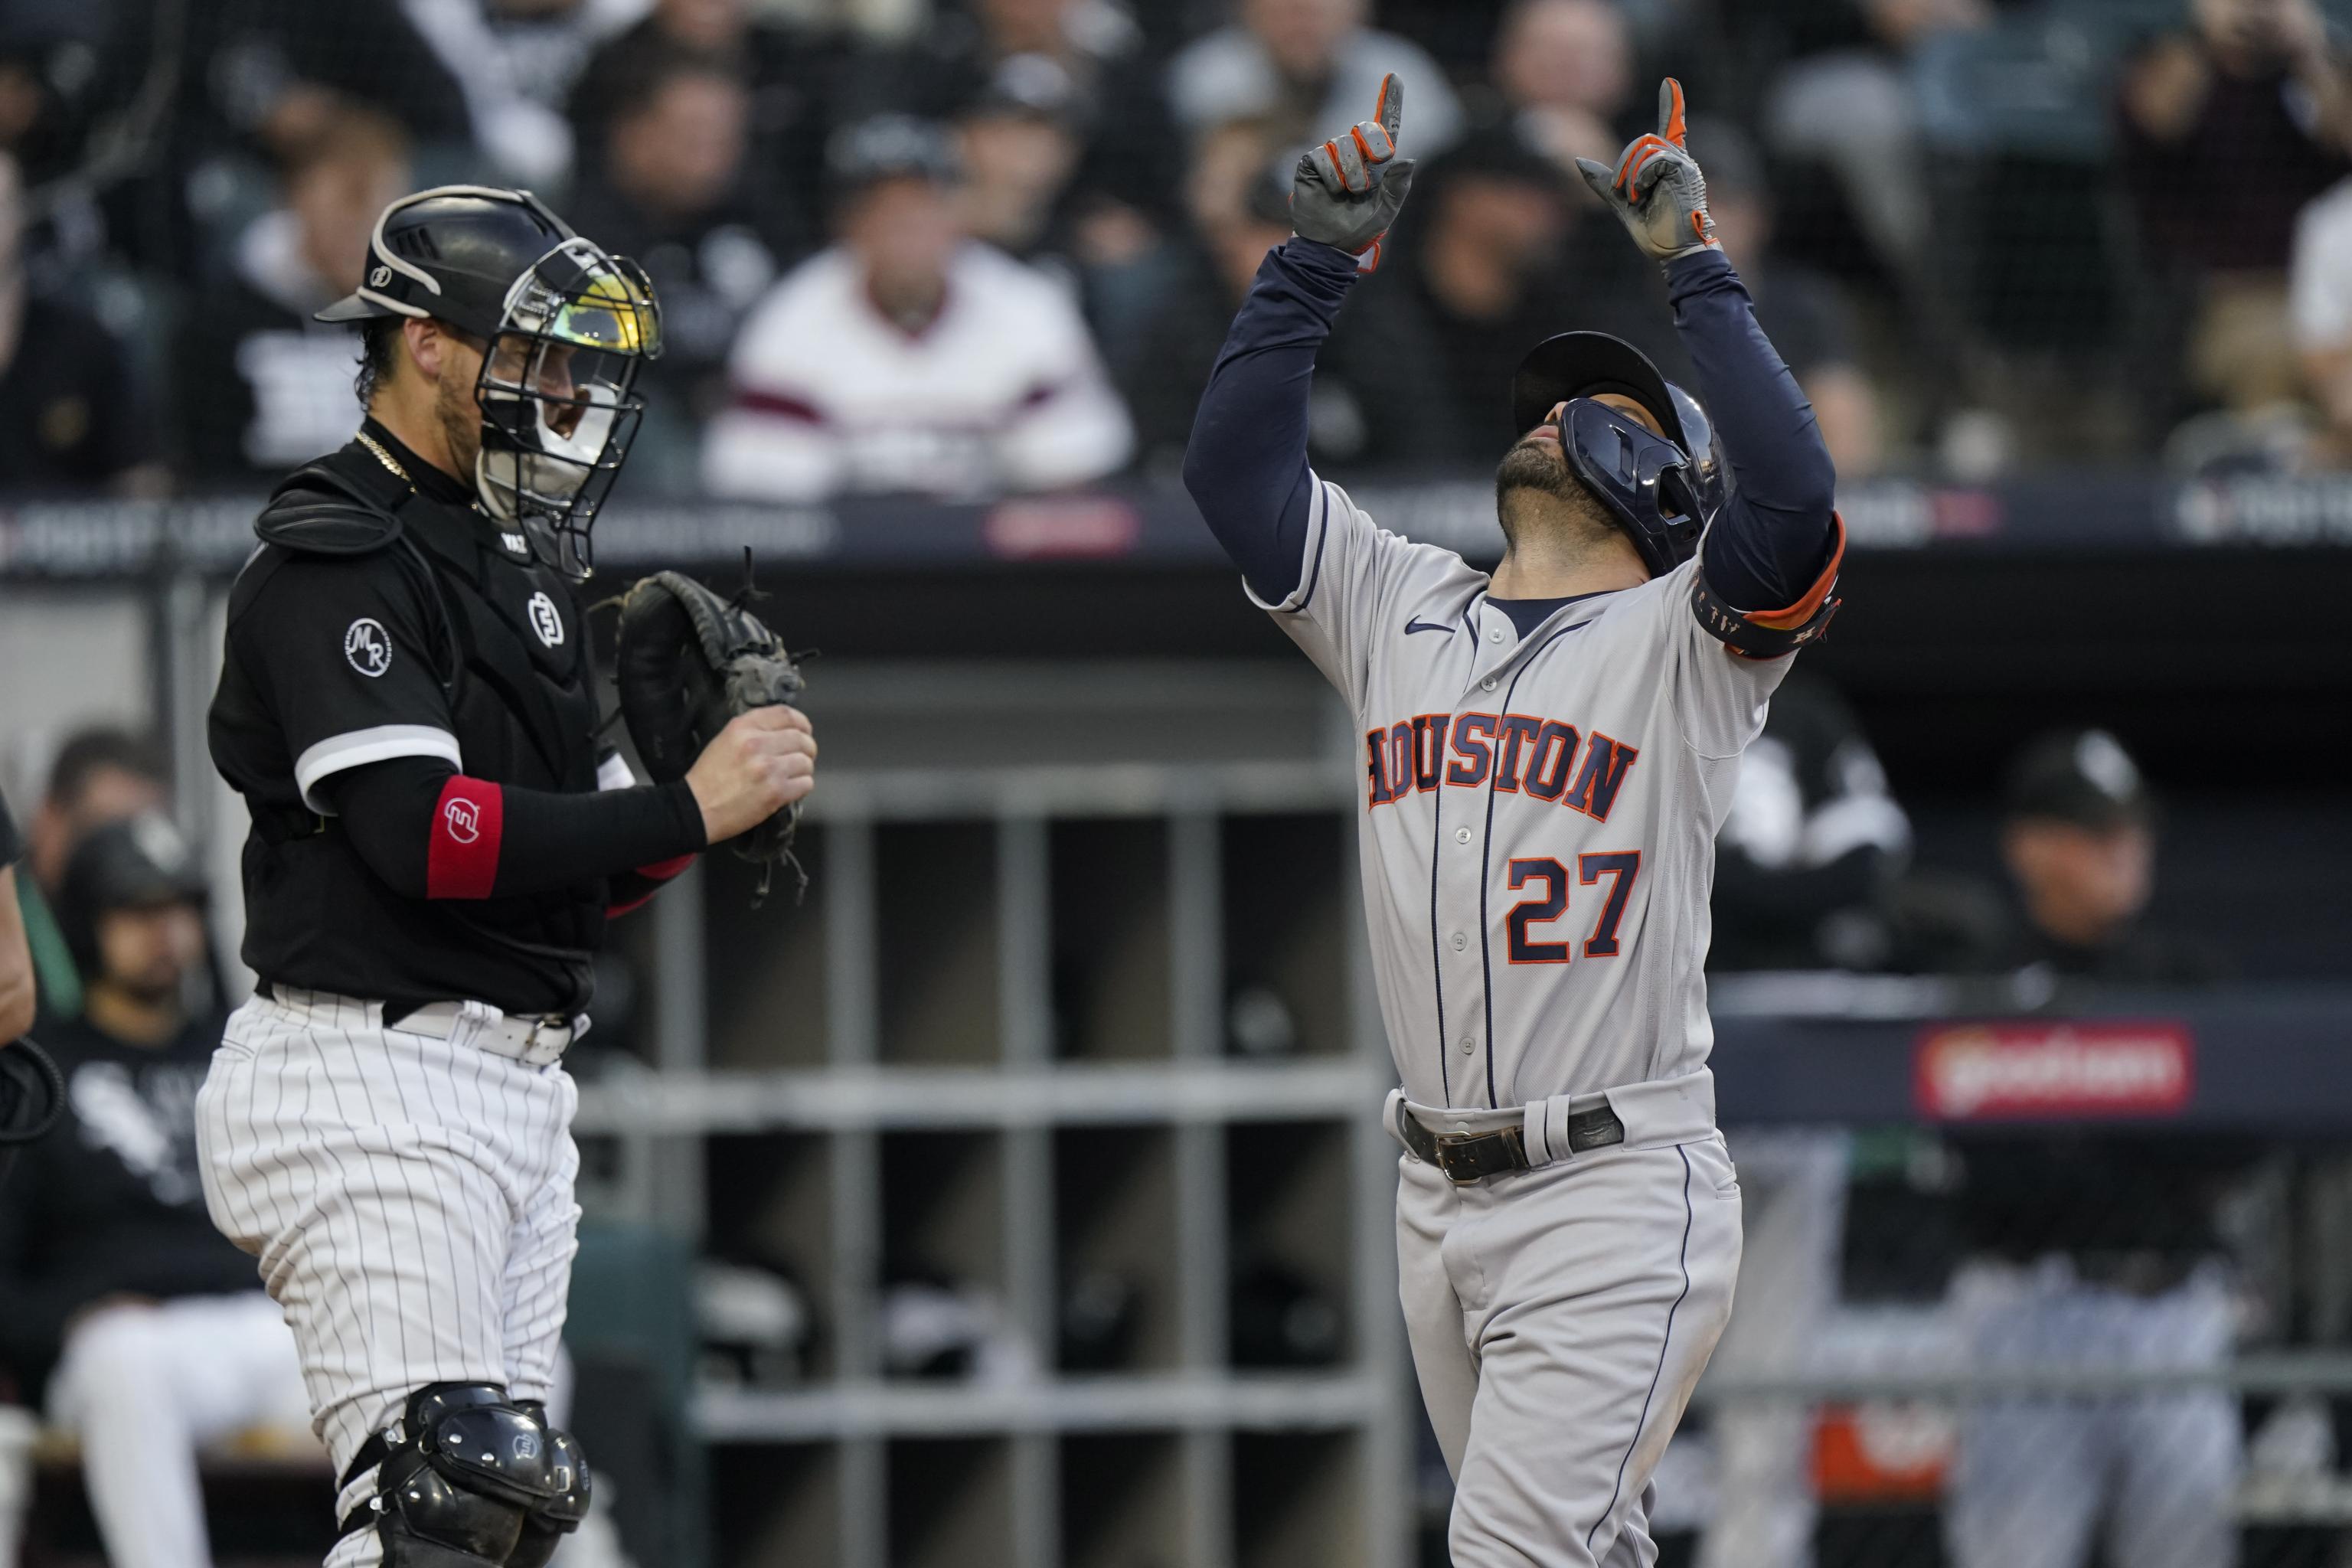 The Astros have become the villains that MLB has been missing